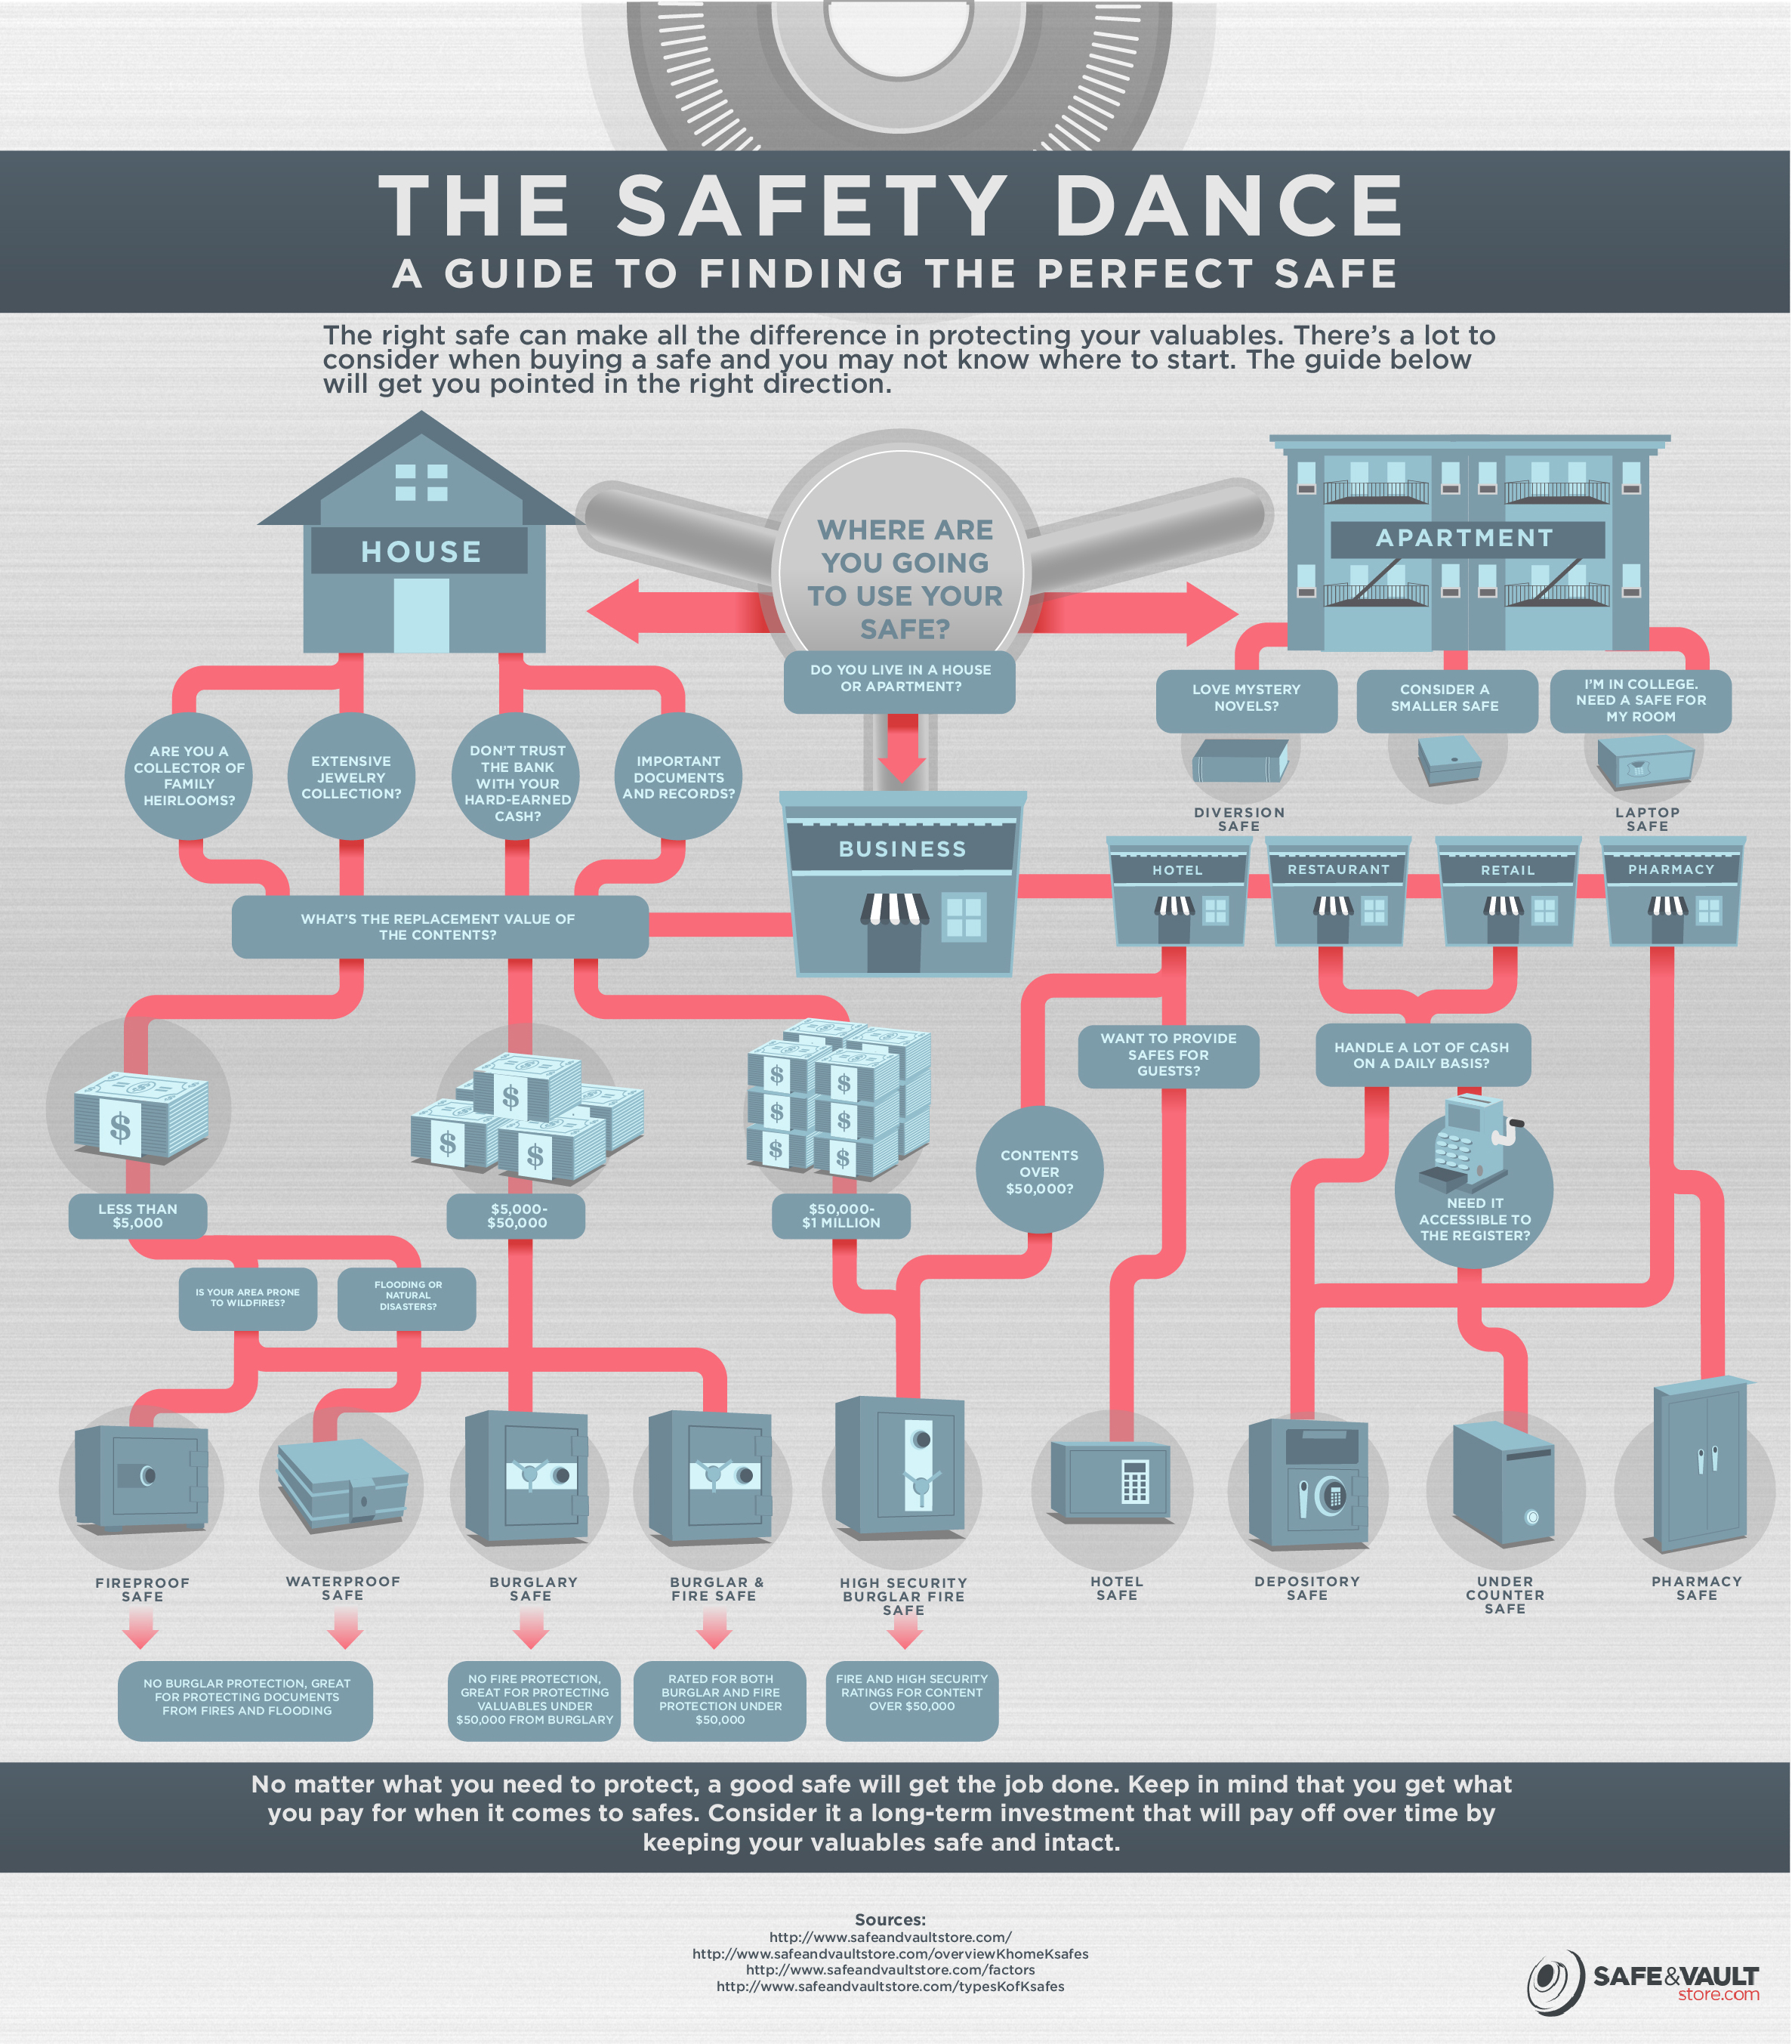 The Safety Dance: A Guide to Finding the Right Safe